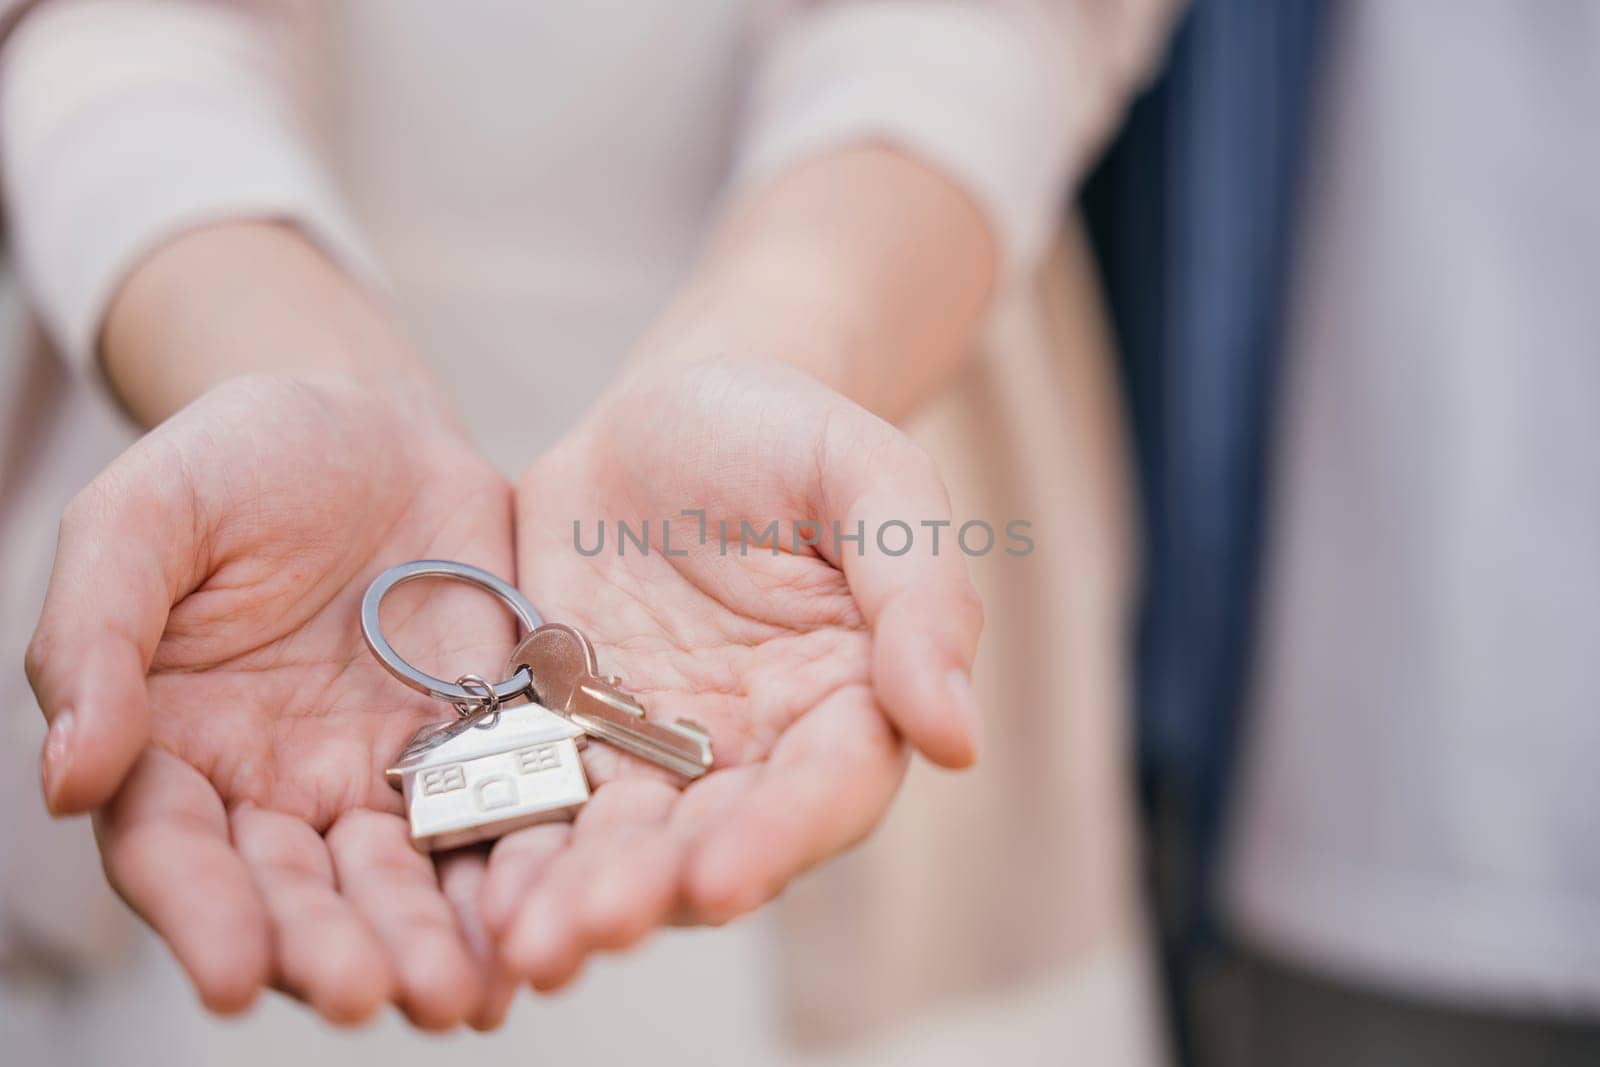 Female landlord gives keys symbolizing new home purchase. Represents successful property deal tenant security and happiness. Real estate concept close-up. Give me the keys by Sorapop